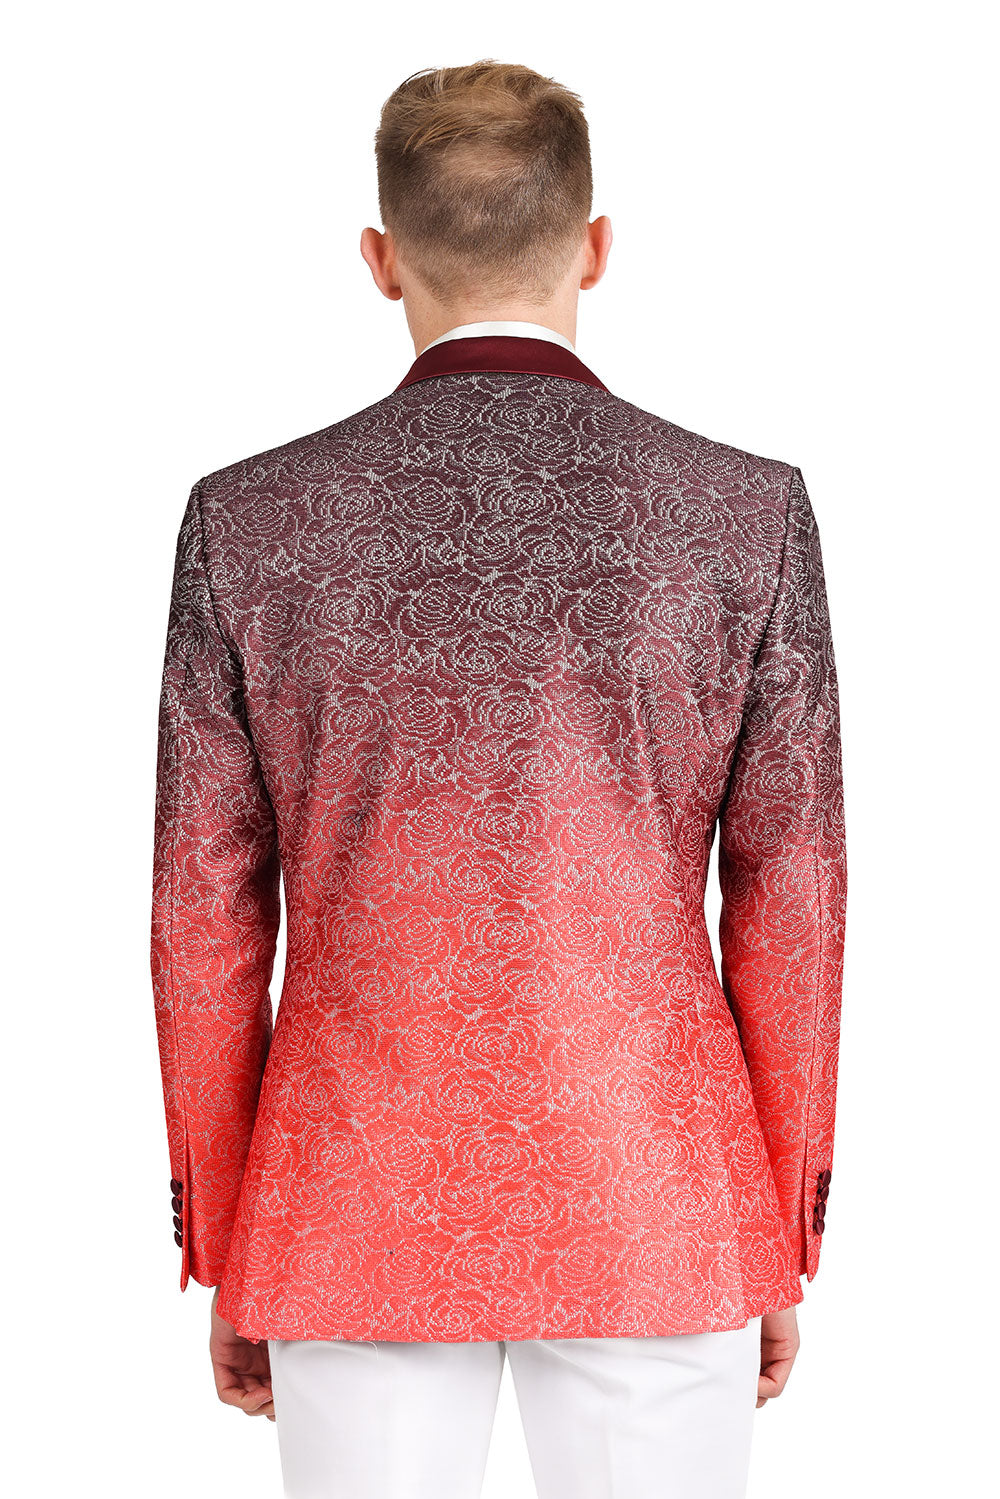 A stylish high school student wearing KCT Menswear's Dazzling Prom Blazer, showcasing its stunning two-tone red fading effect, silver floral pattern, and gradient design - perfect for a memorable prom night.